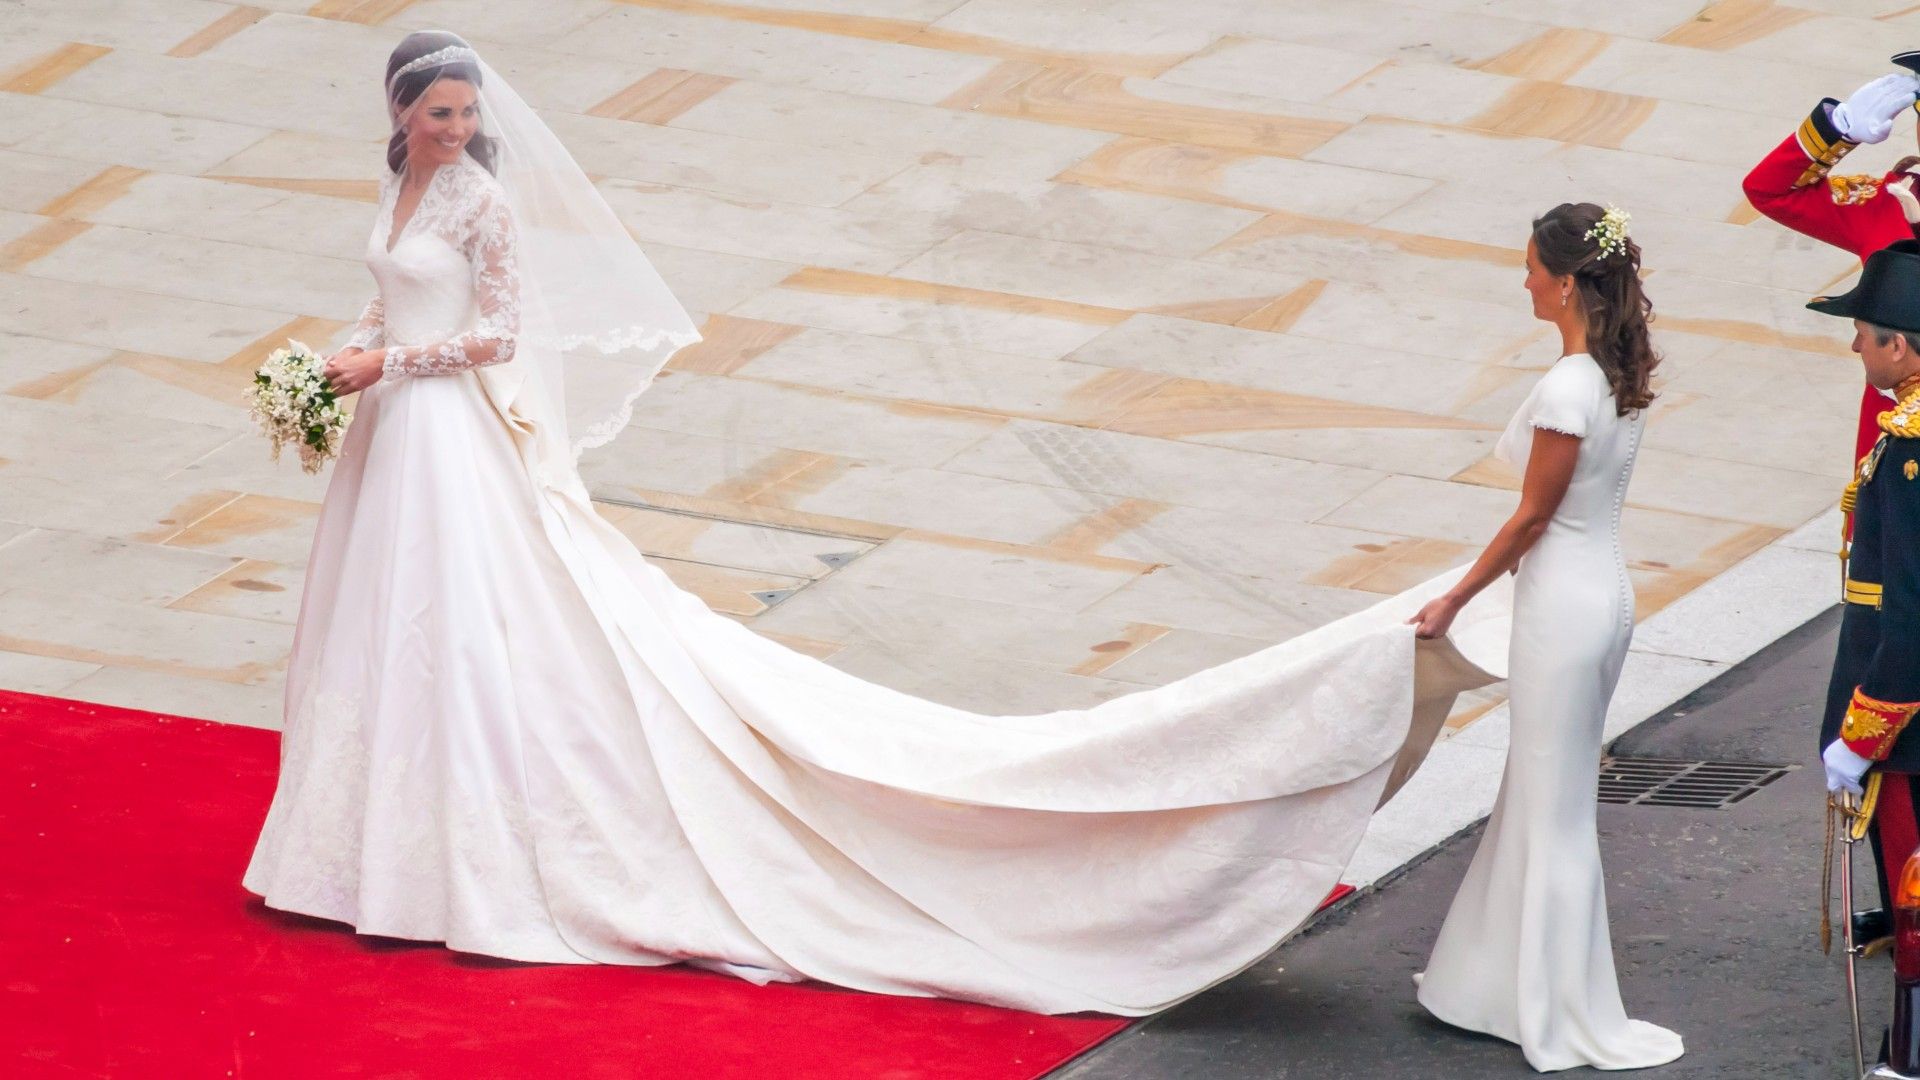 32 fun and little-known facts from Prince and Princess of Wales's wedding